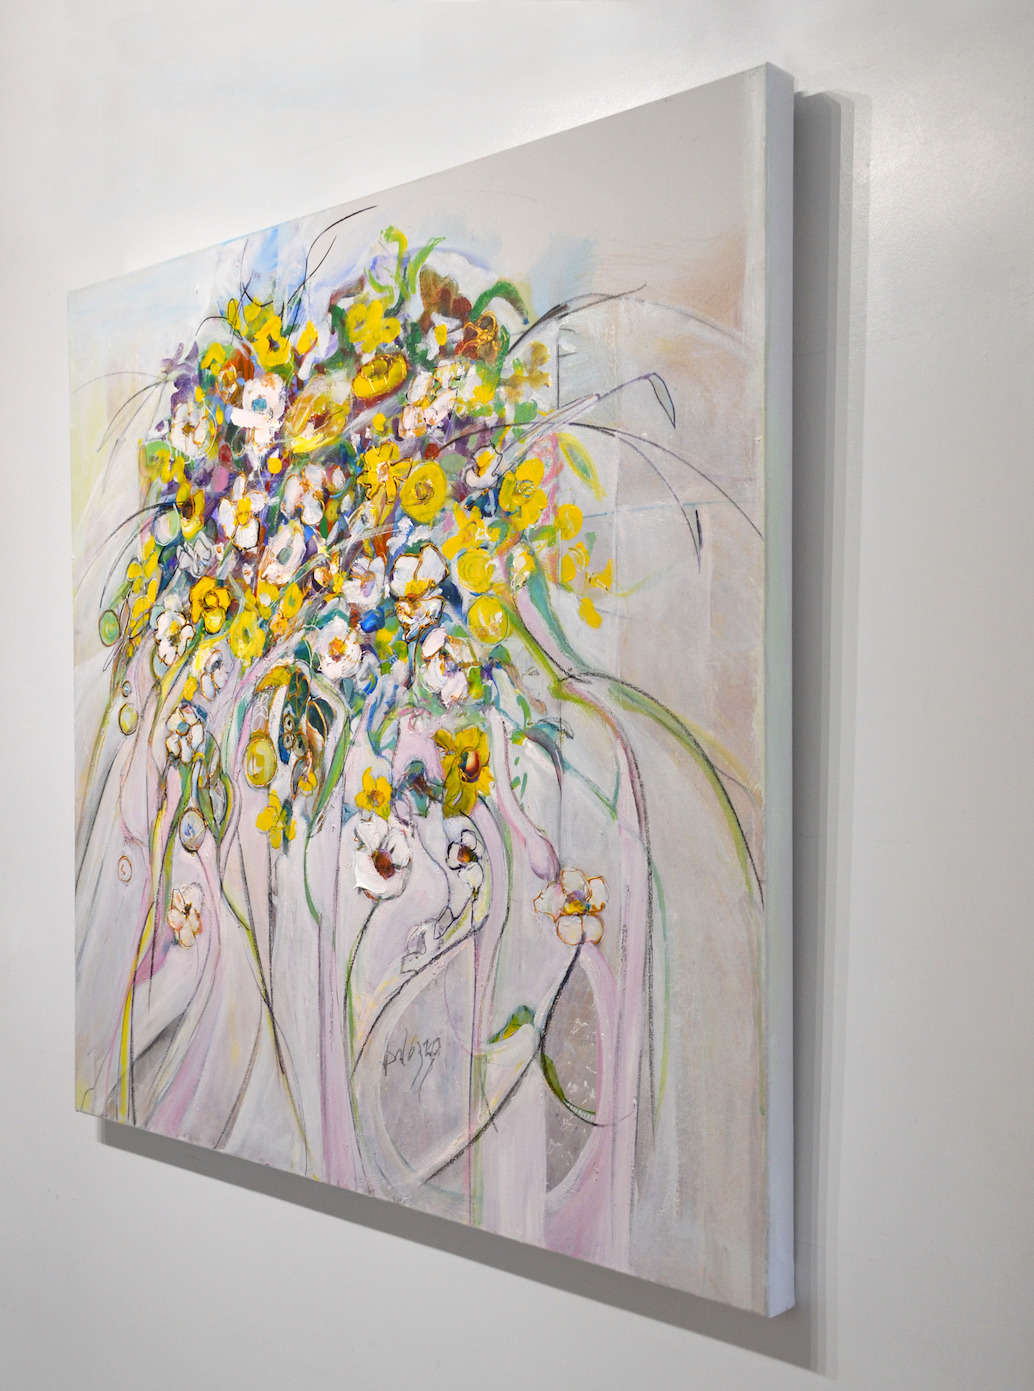 Side View Of Still Life Painting "Yellow Splendour" By Lucette Dalozzo